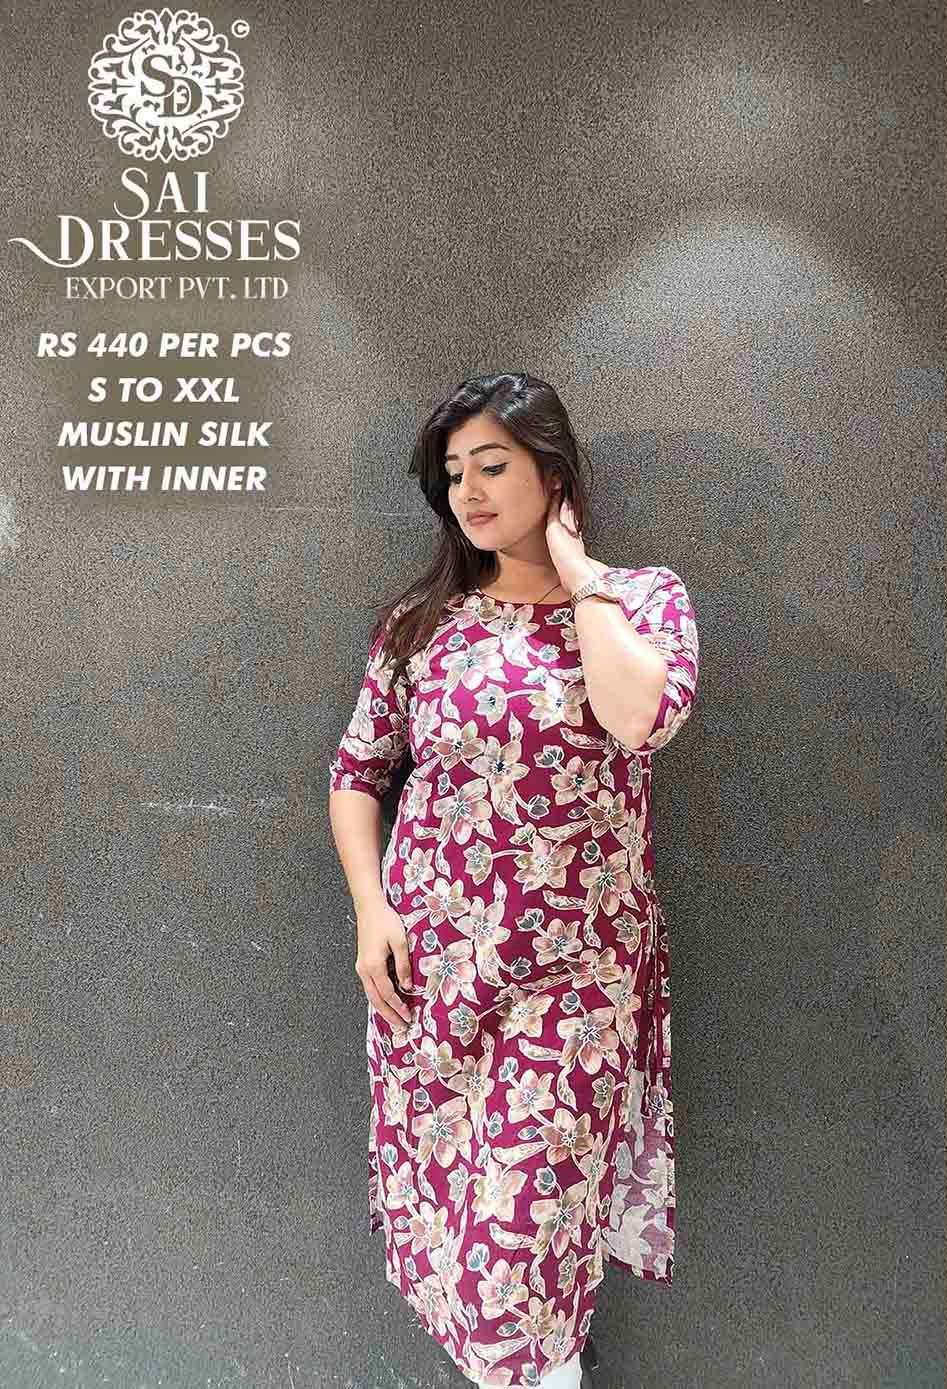 SAI DRESSES PRESENT D.NO SD45 READY TO WEAR DIGITAL PRINTED KURTI COMBO COLLECTION IN WHOLESALE RATE IN SURAT